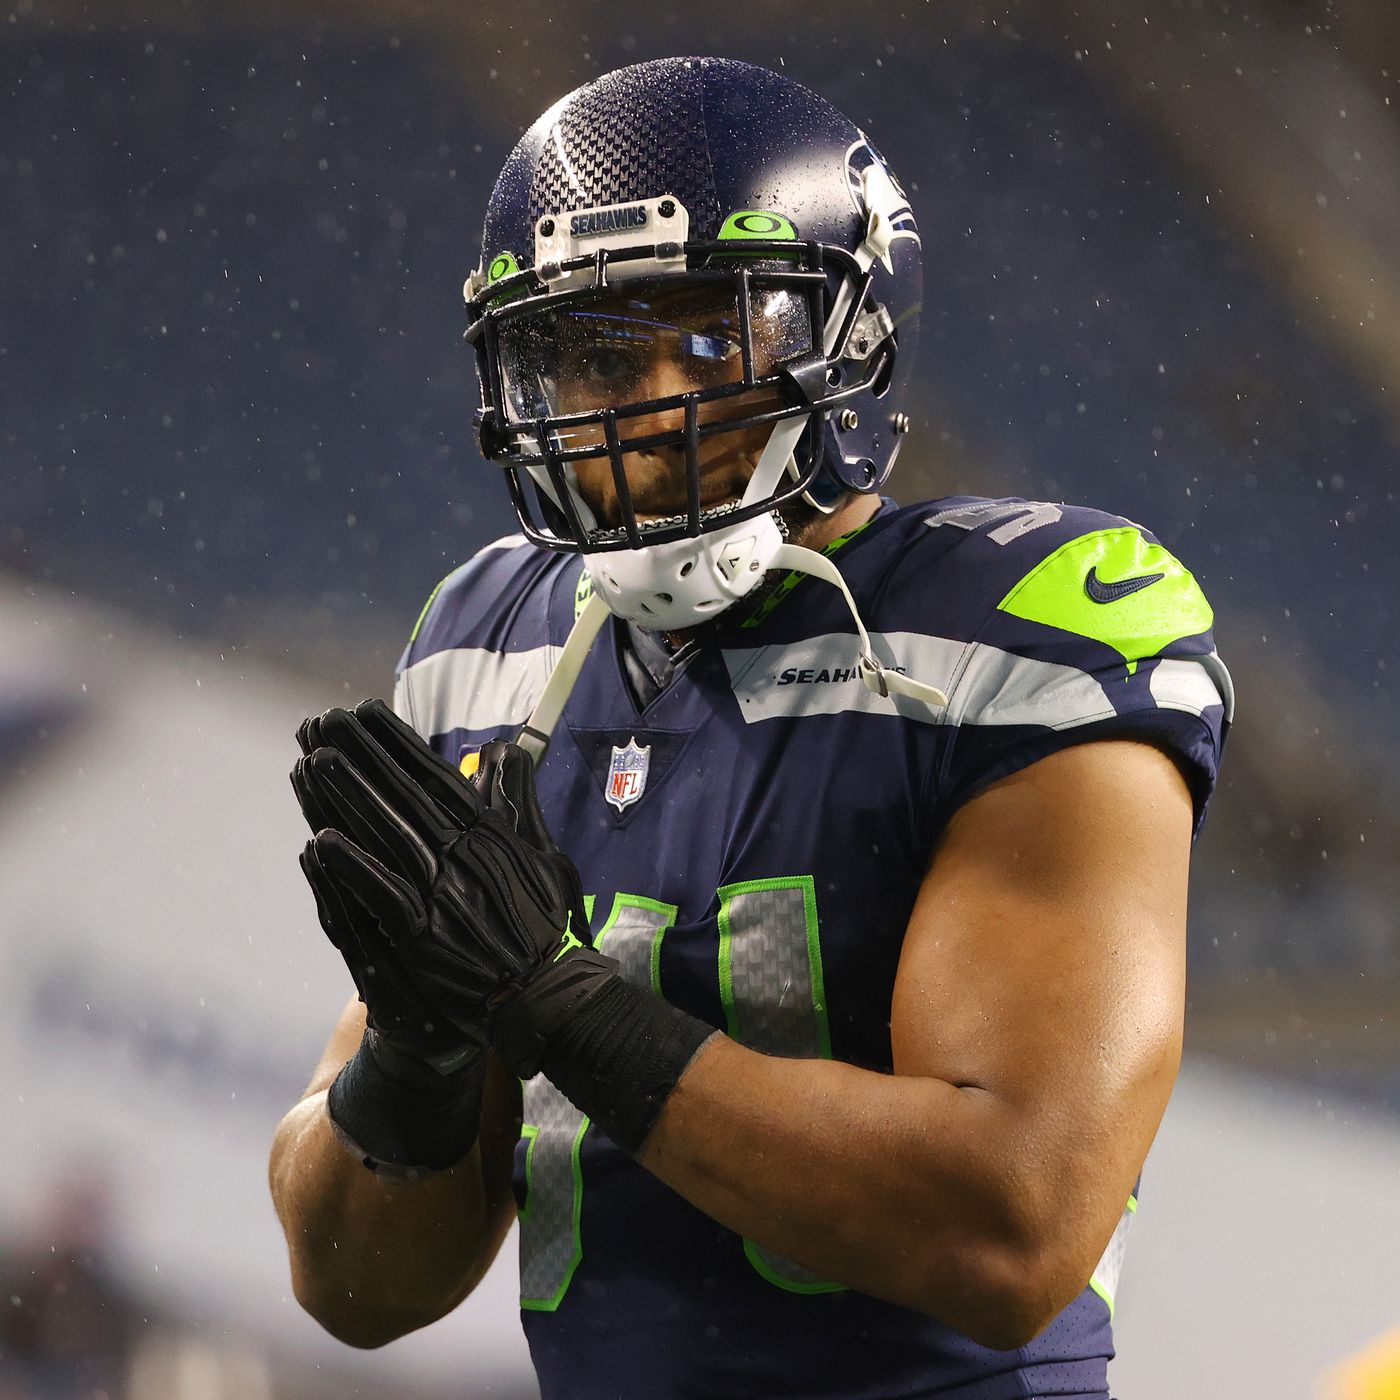 Should the Seahawks sign Bobby Wagner for a Super Bowl run